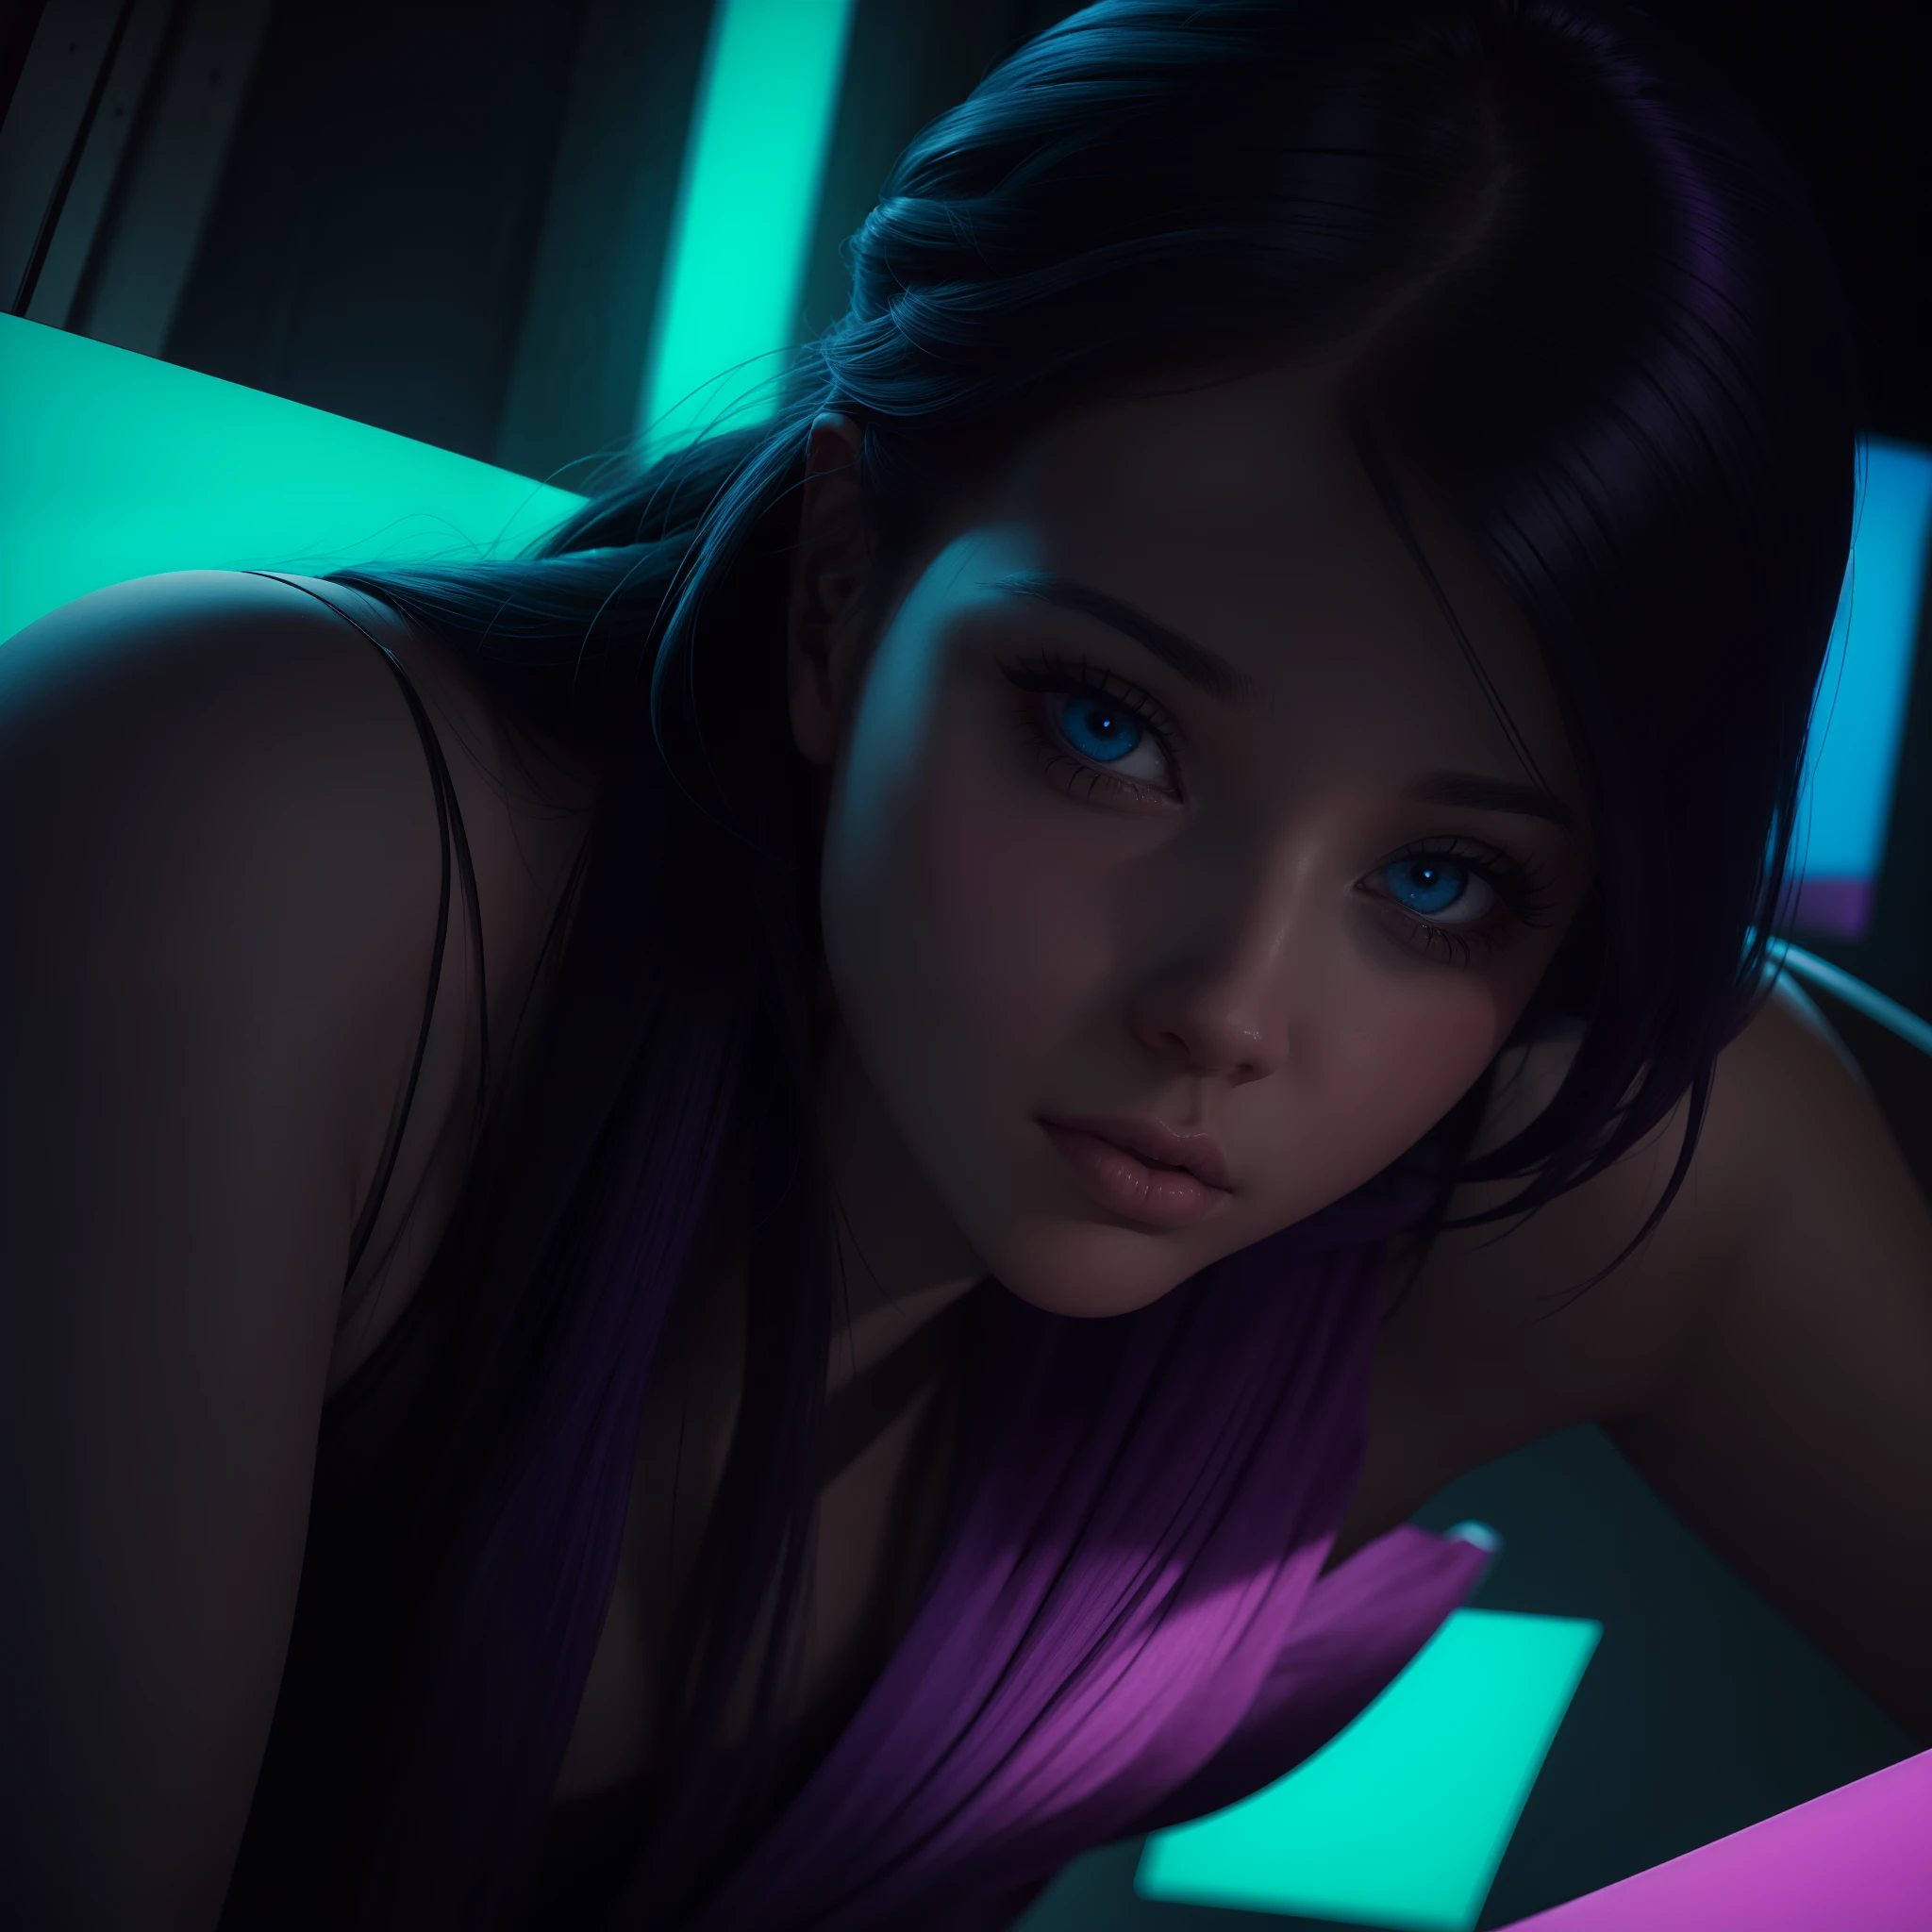 Hyperrealistic masterpiece lines of code on a readable transparent screen with neon purple and blue color, pink eyes, 23-year-old girls, bare shoulders, neon cyan